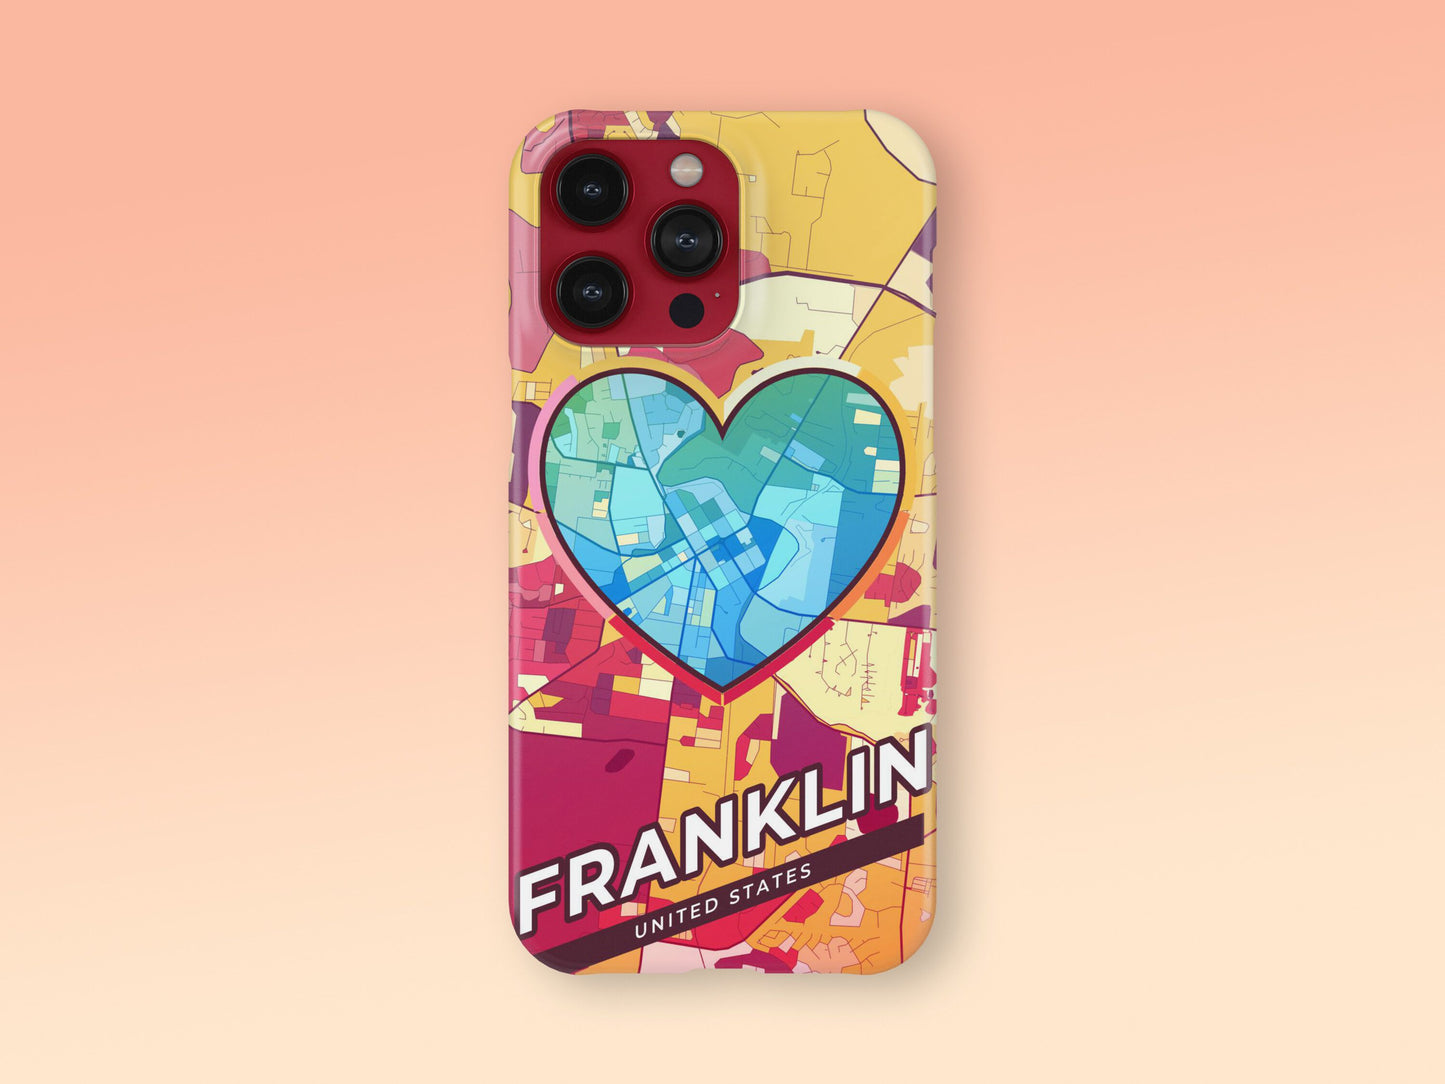 Franklin Tennessee slim phone case with colorful icon. Birthday, wedding or housewarming gift. Couple match cases. 2